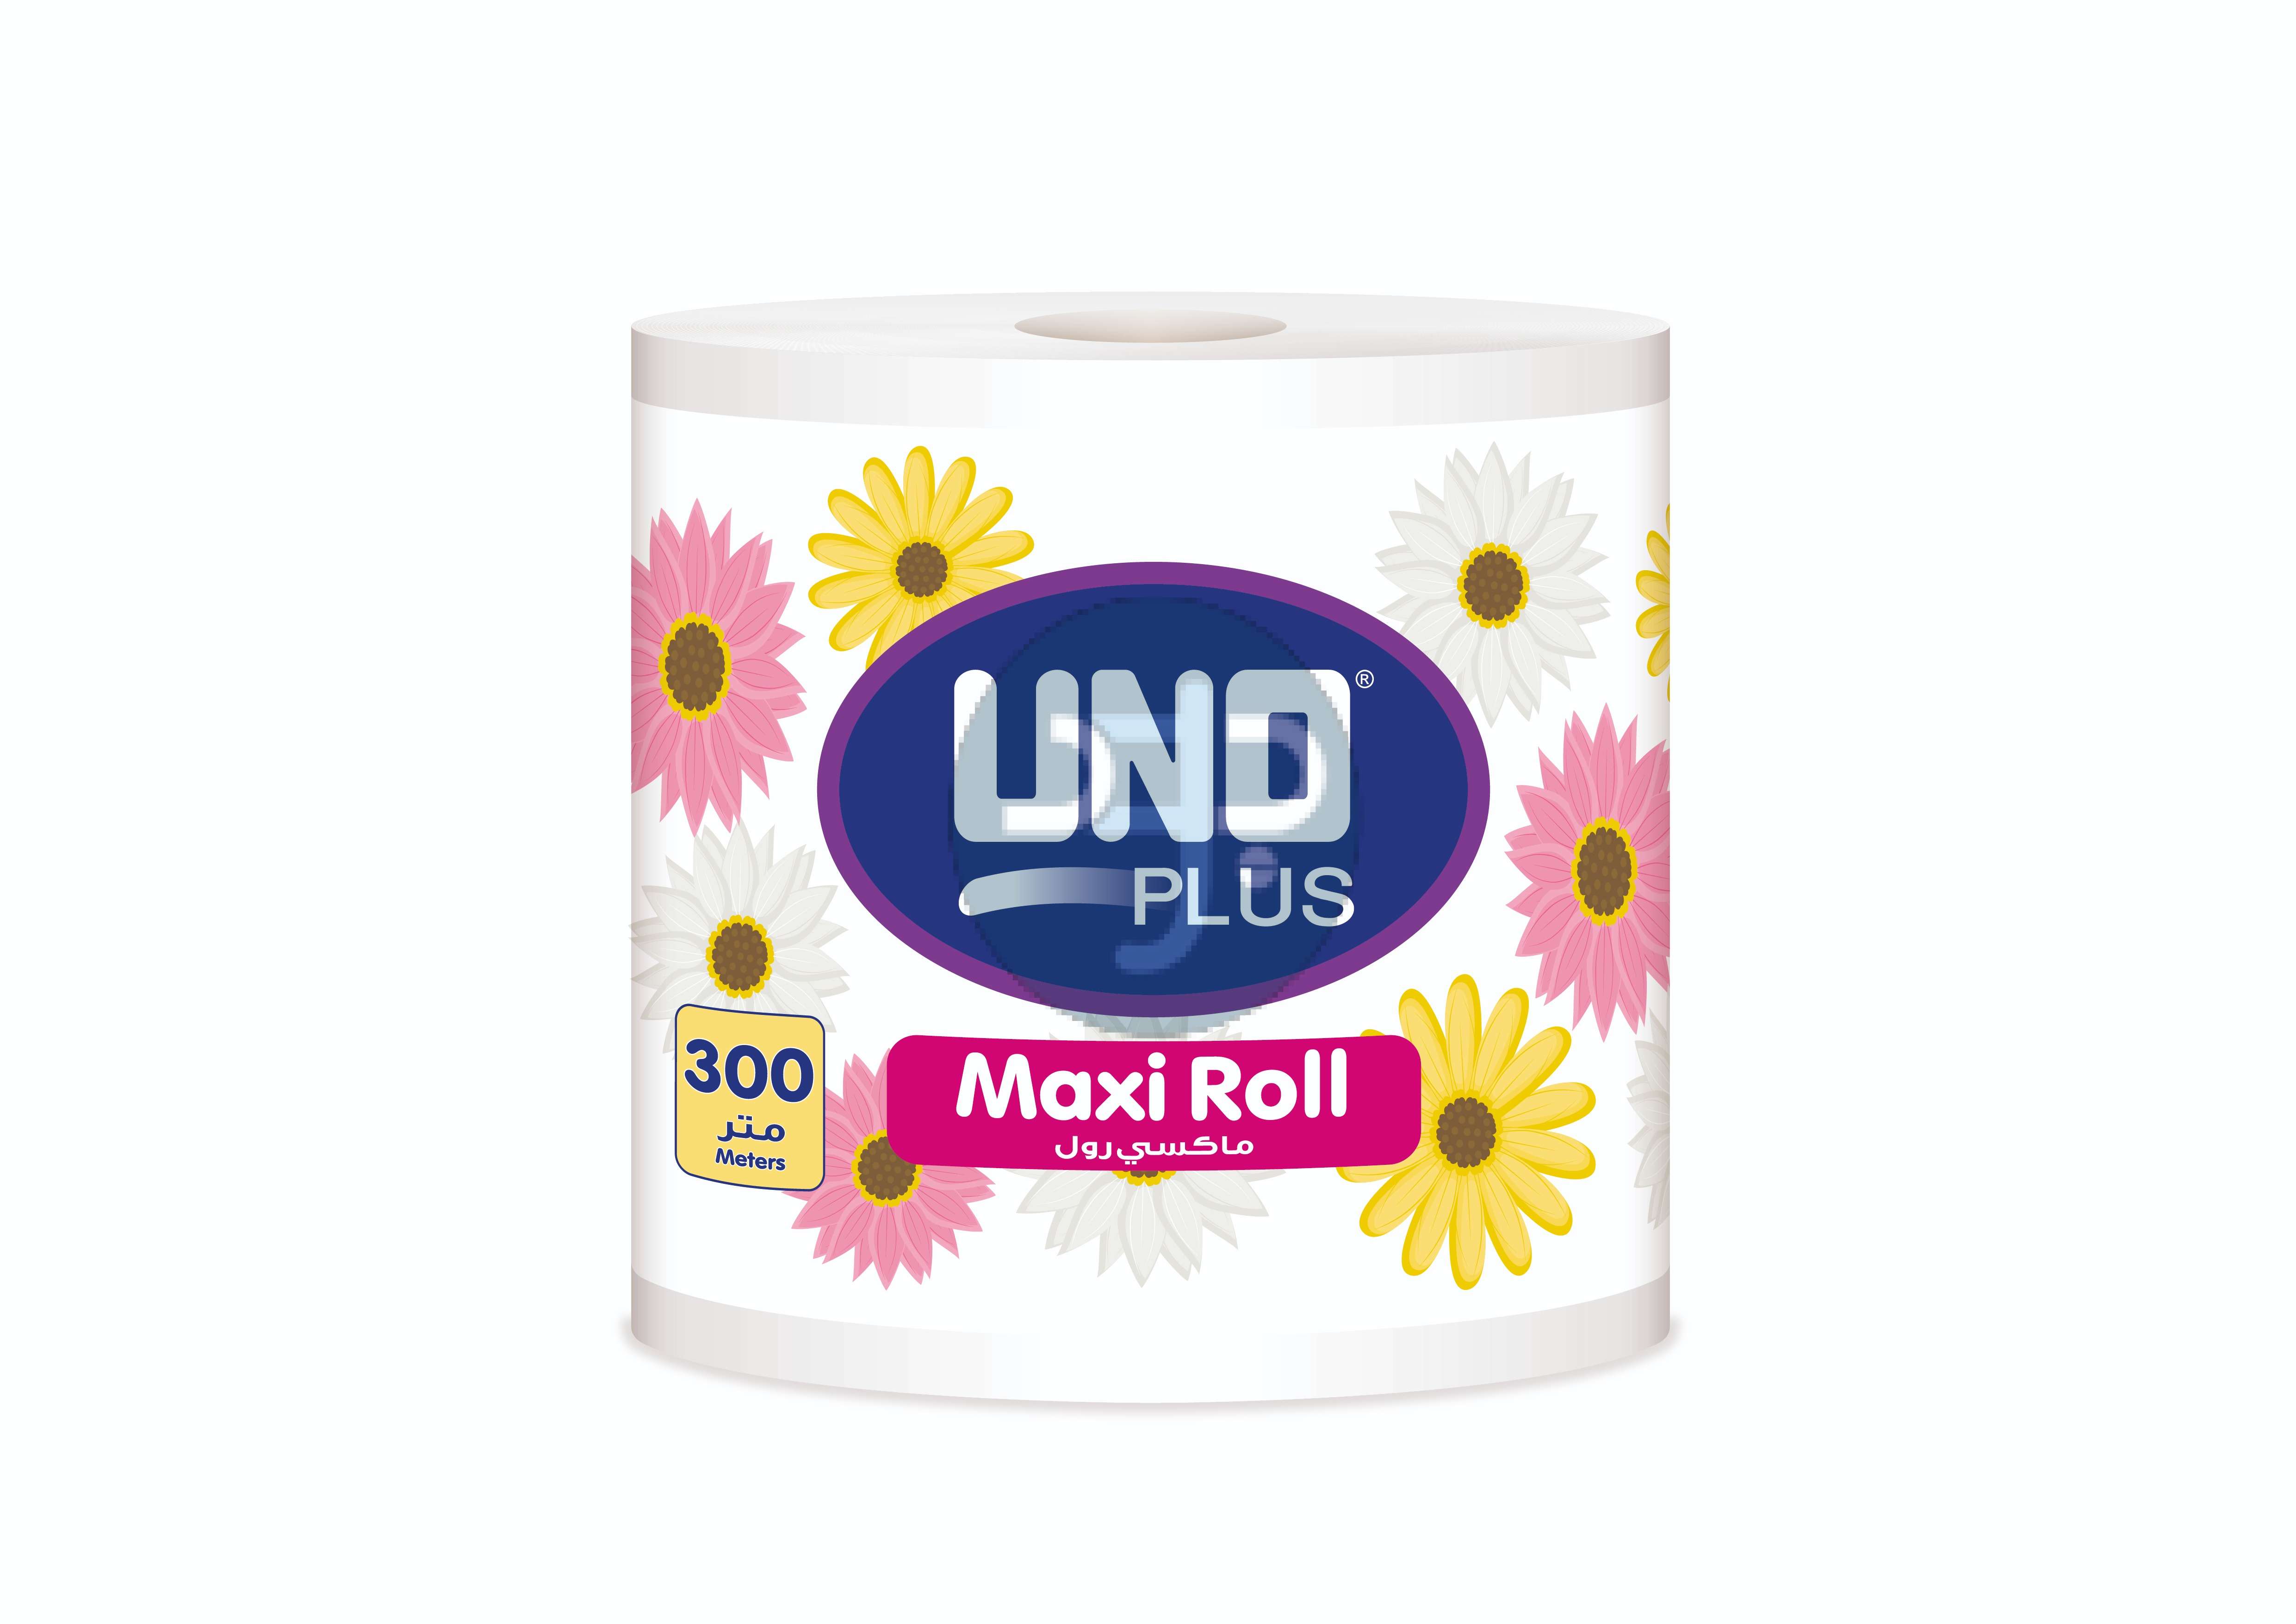 Product-Uno Multi Purpose Towels , 1 Roll , 300 Meter, White